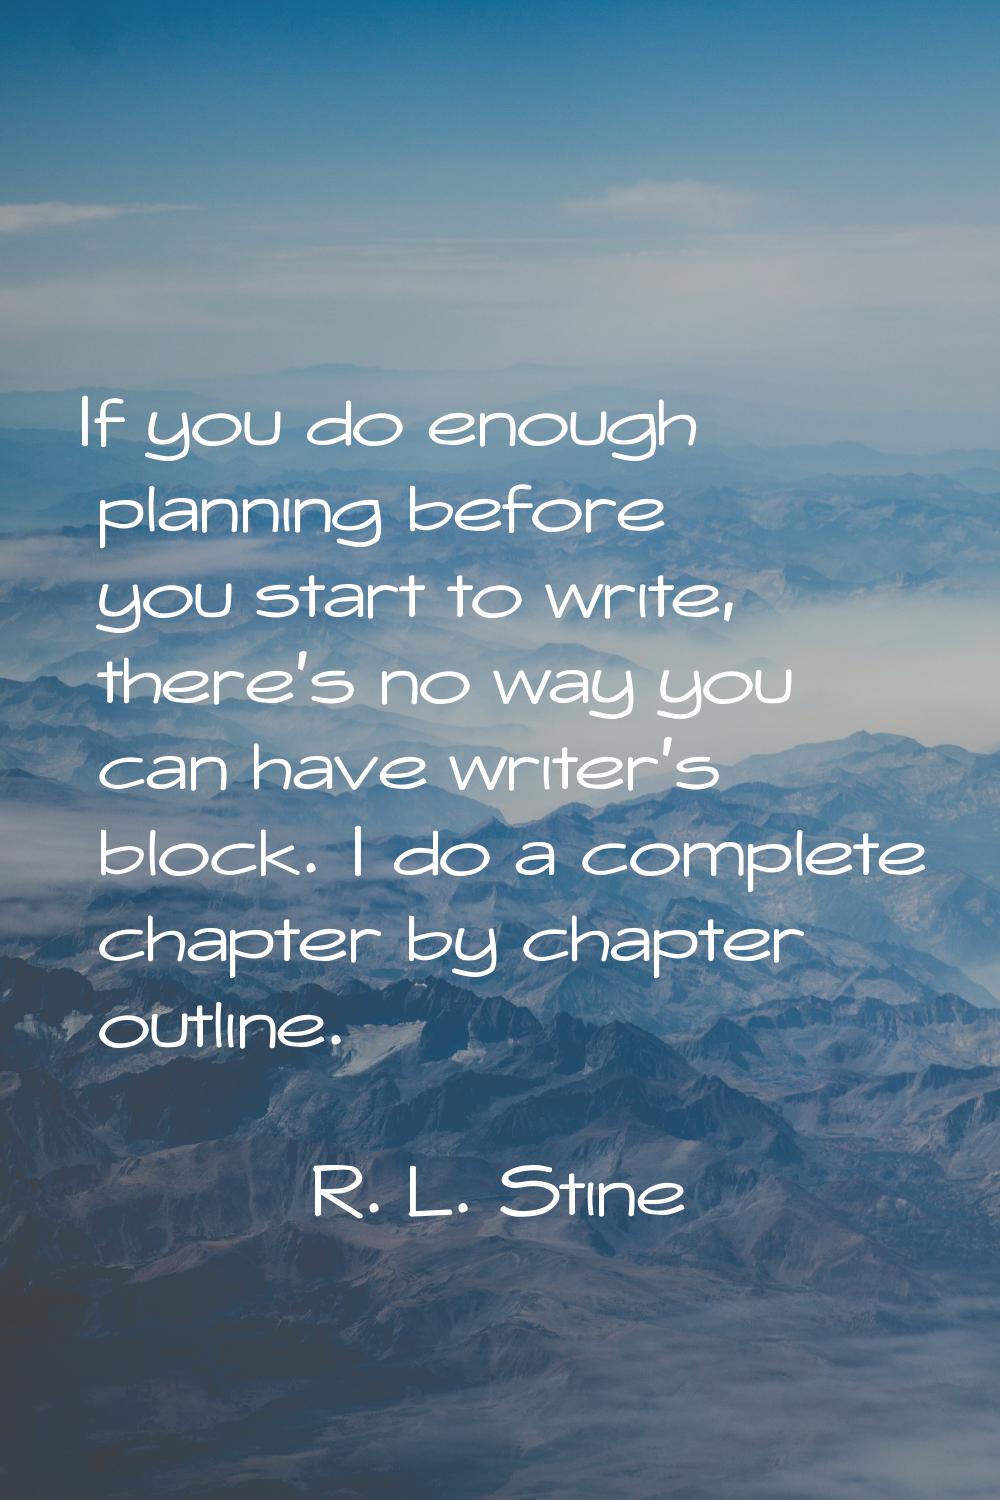 If you do enough planning before you start to write, there's no way you can have writer's block. I 